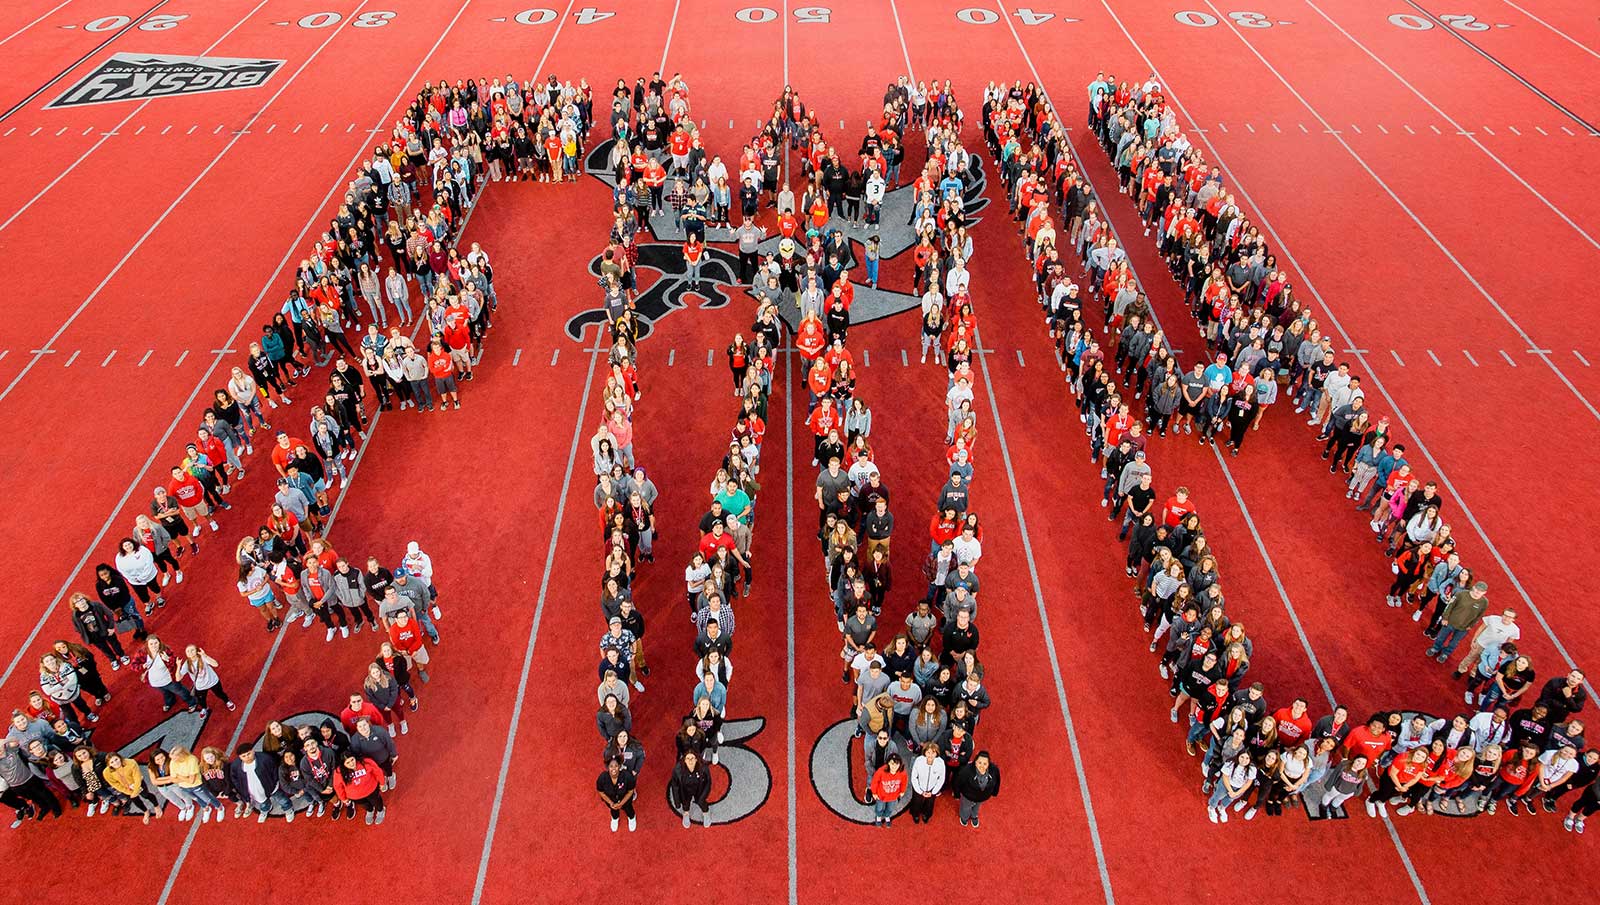 Students from the class of 2022 assemble to form the letters "EWU" on the red turf of Roos Field